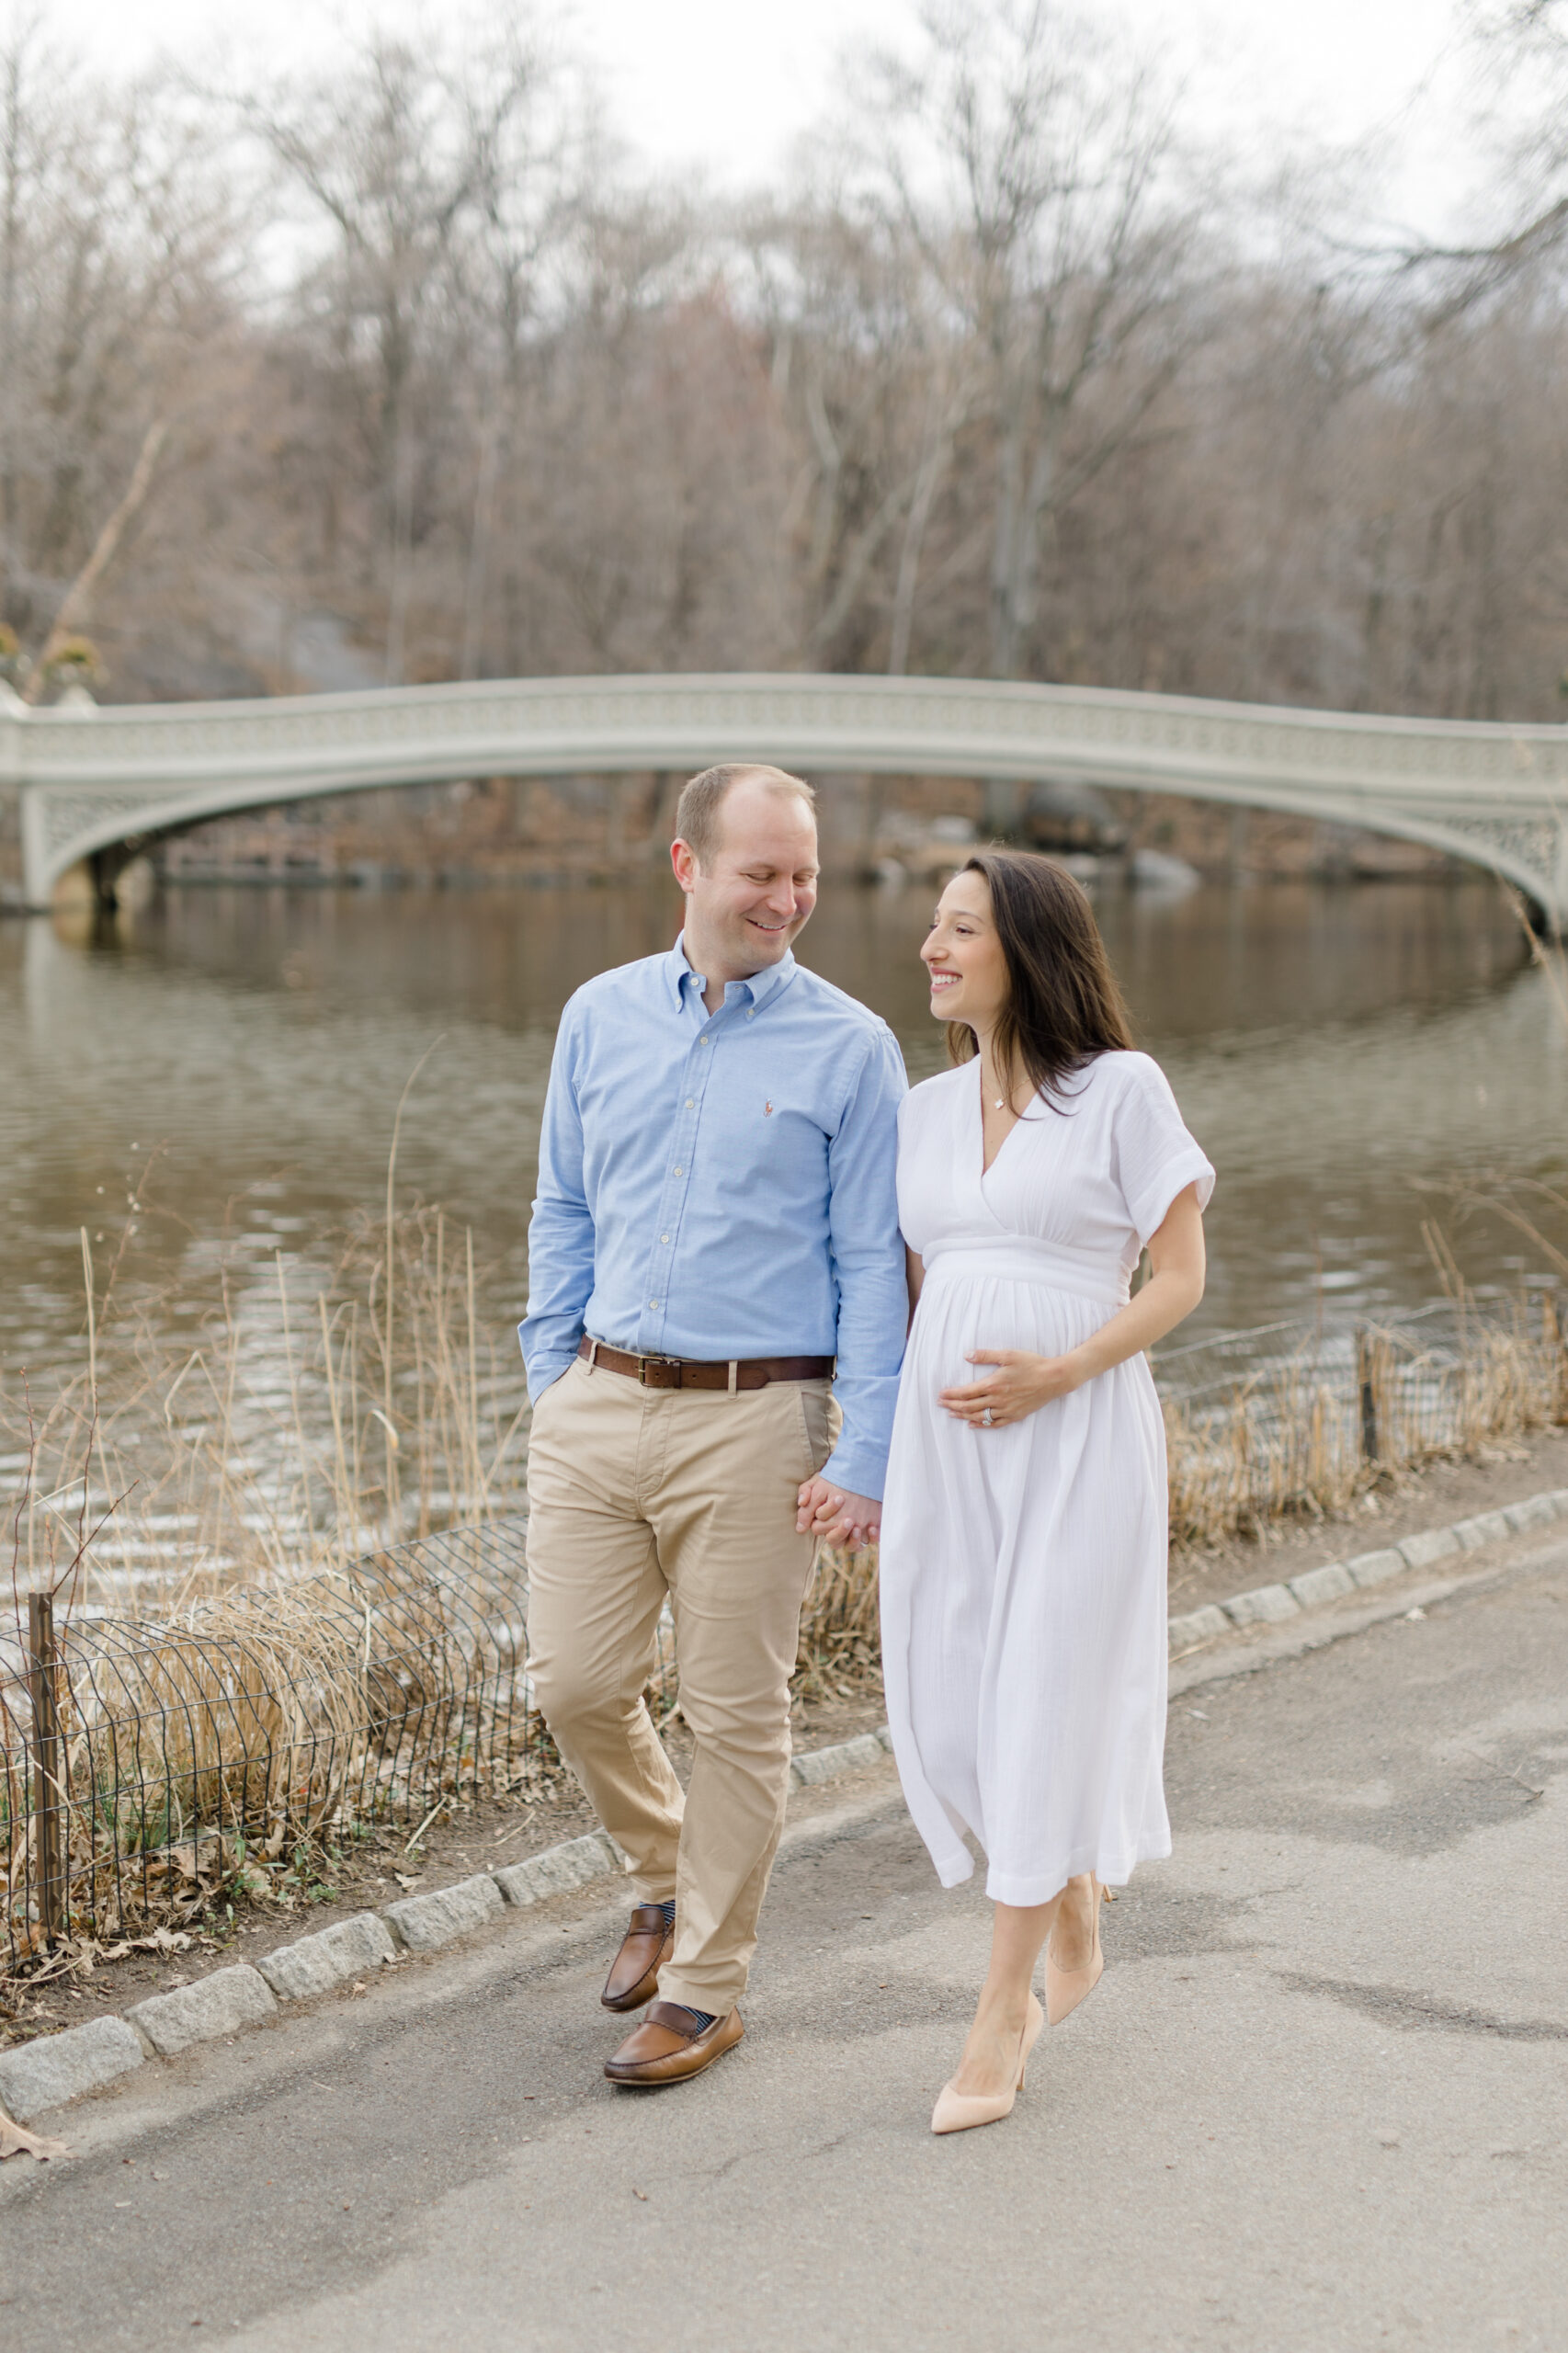 An expecting couple walk together in Central Park during a New York City maternity photography session